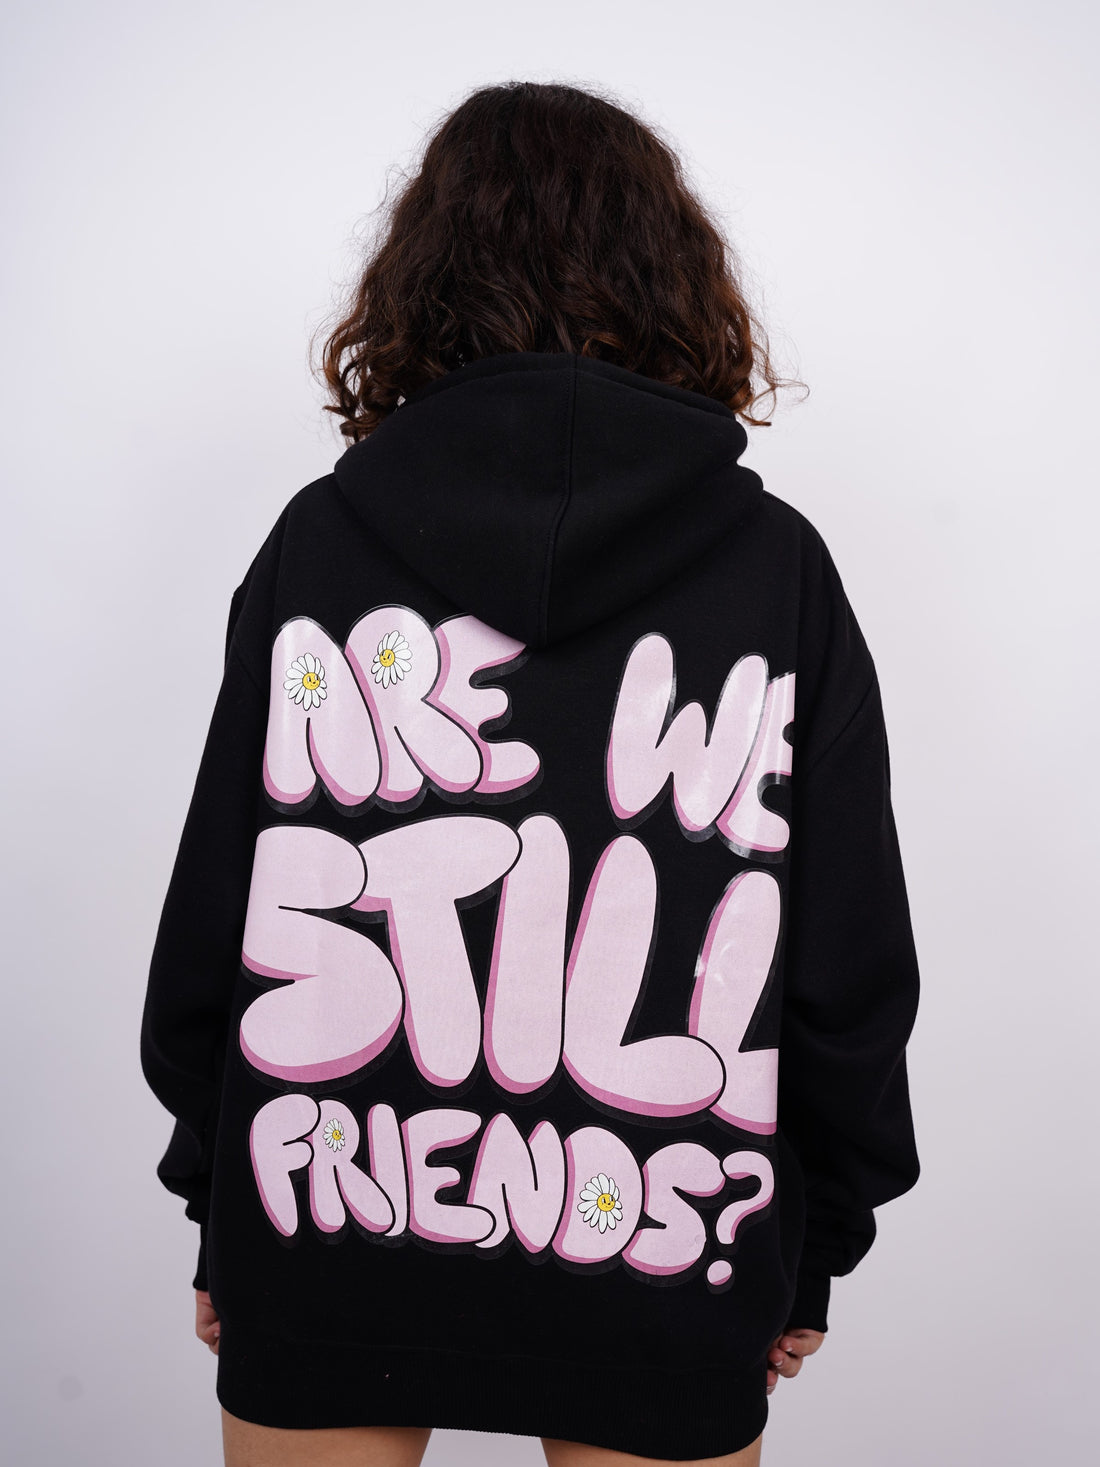 Are We still Friends ? - Tyler the Creator Heavyweight Baggy Hoodie For Men and Women